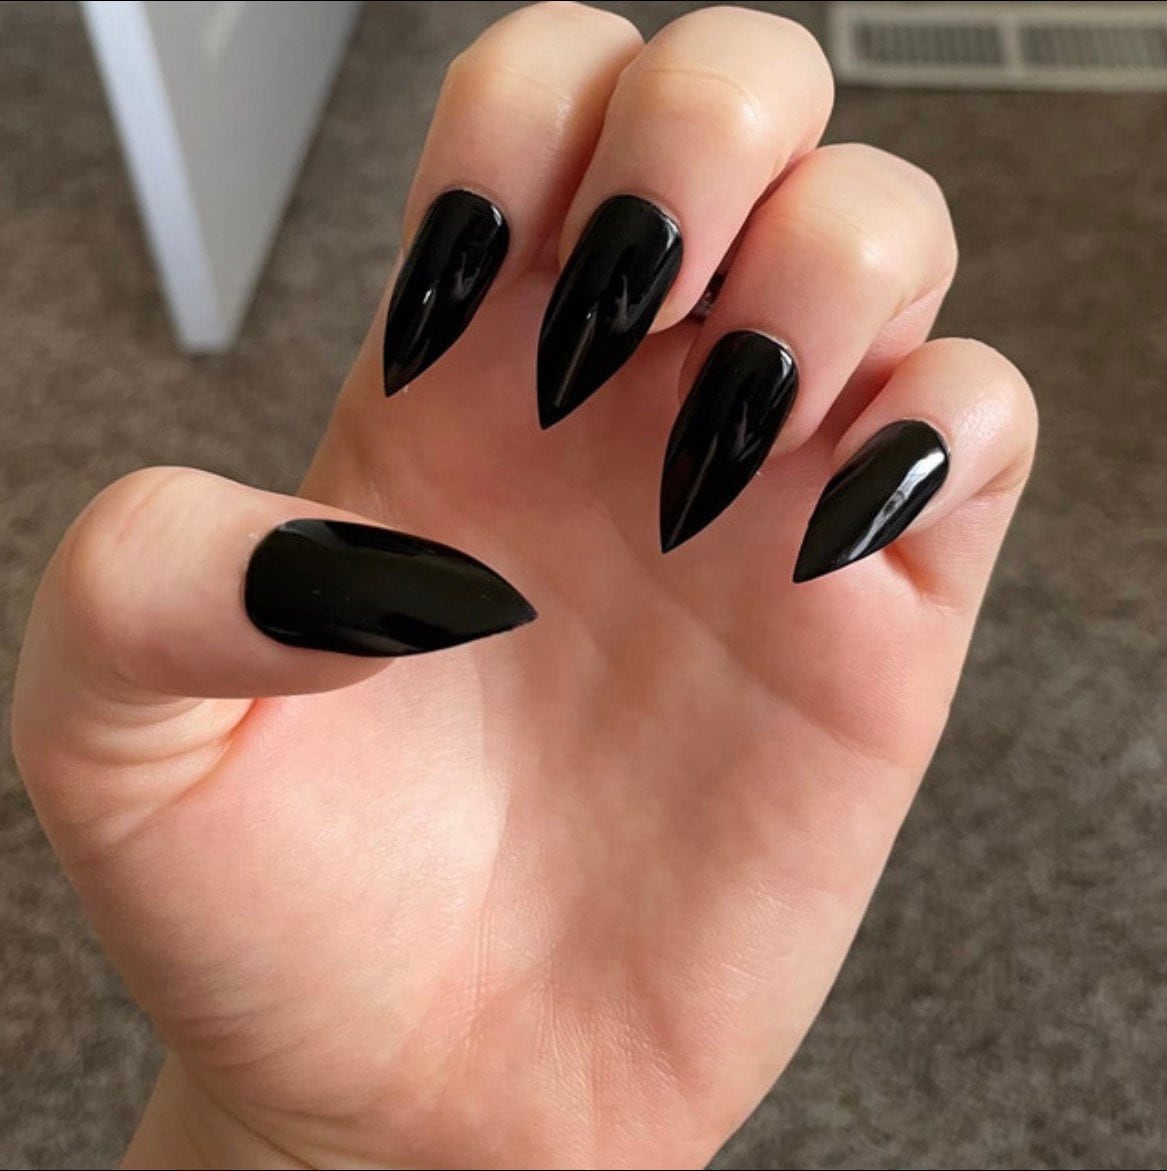 christian mcmurray recommends black sharp nails pic